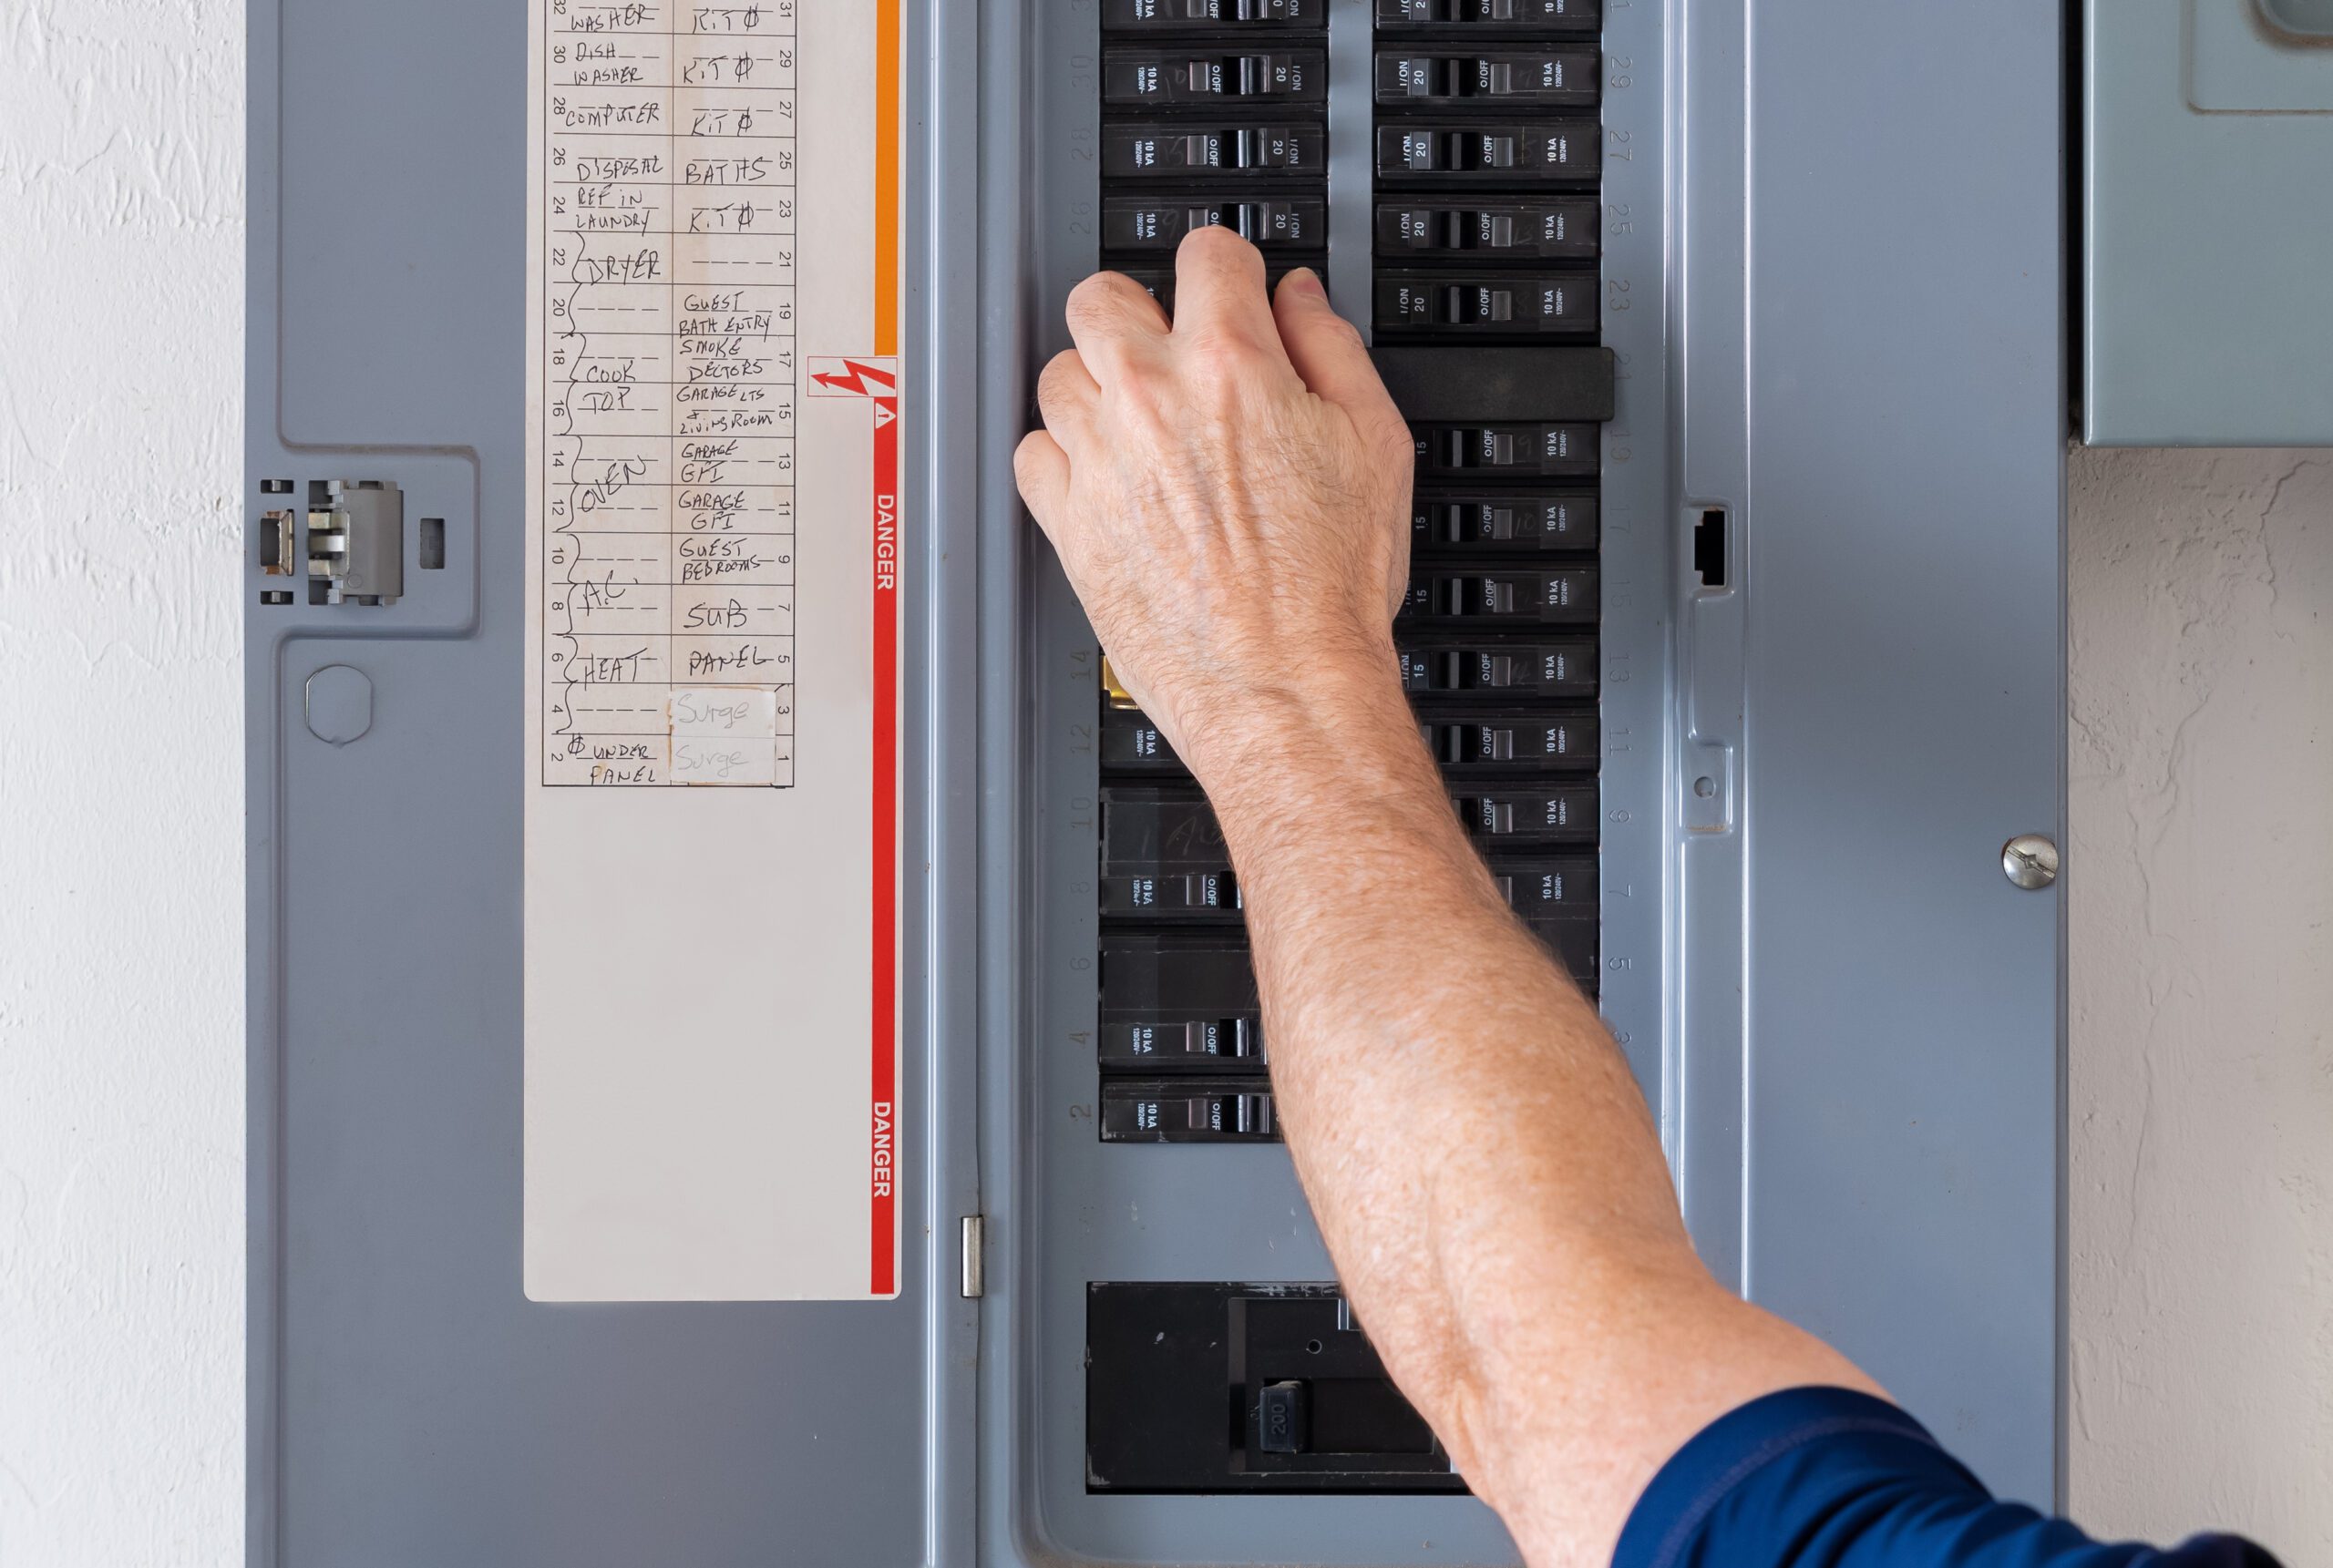 Home breaker box and electrical panel repair and installation services in Houston